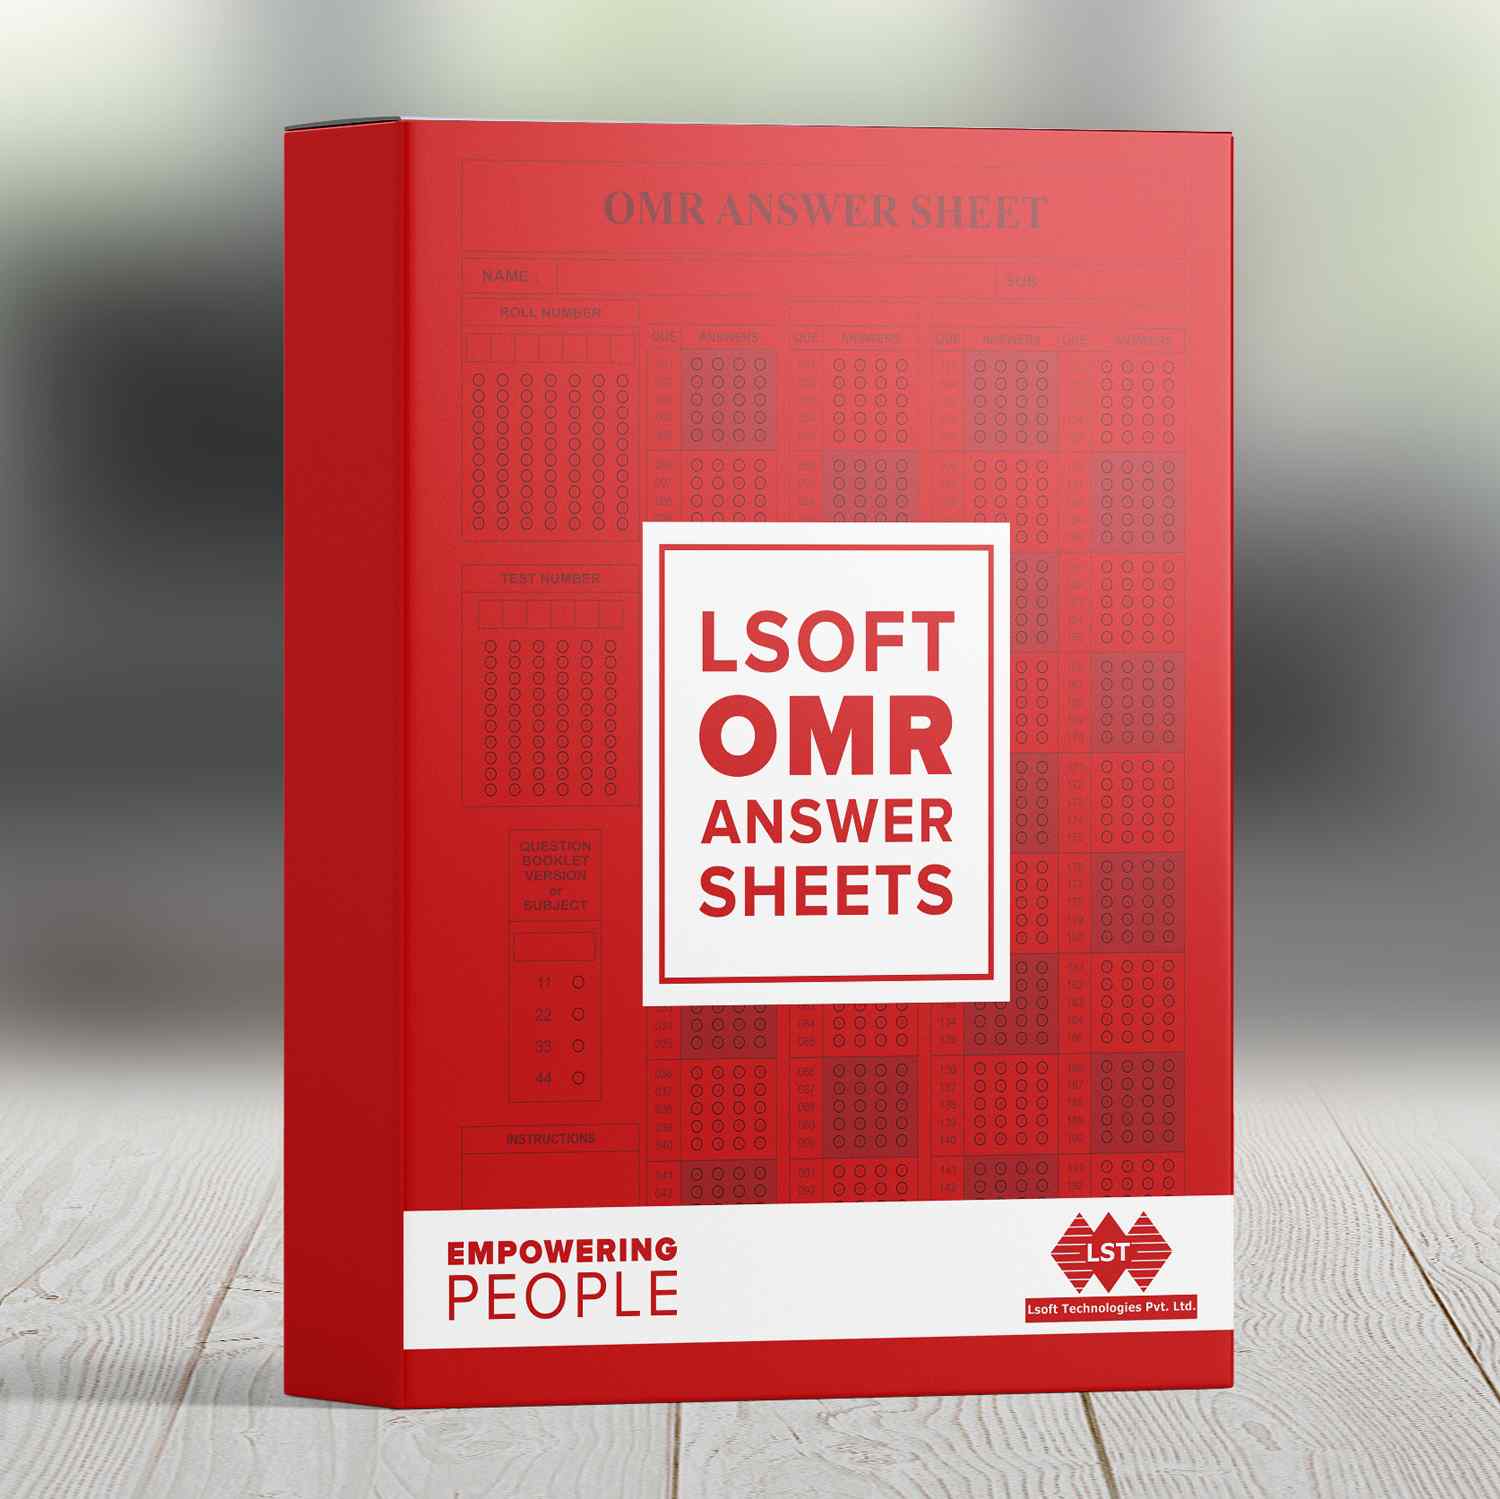 OMR Answer Sheets